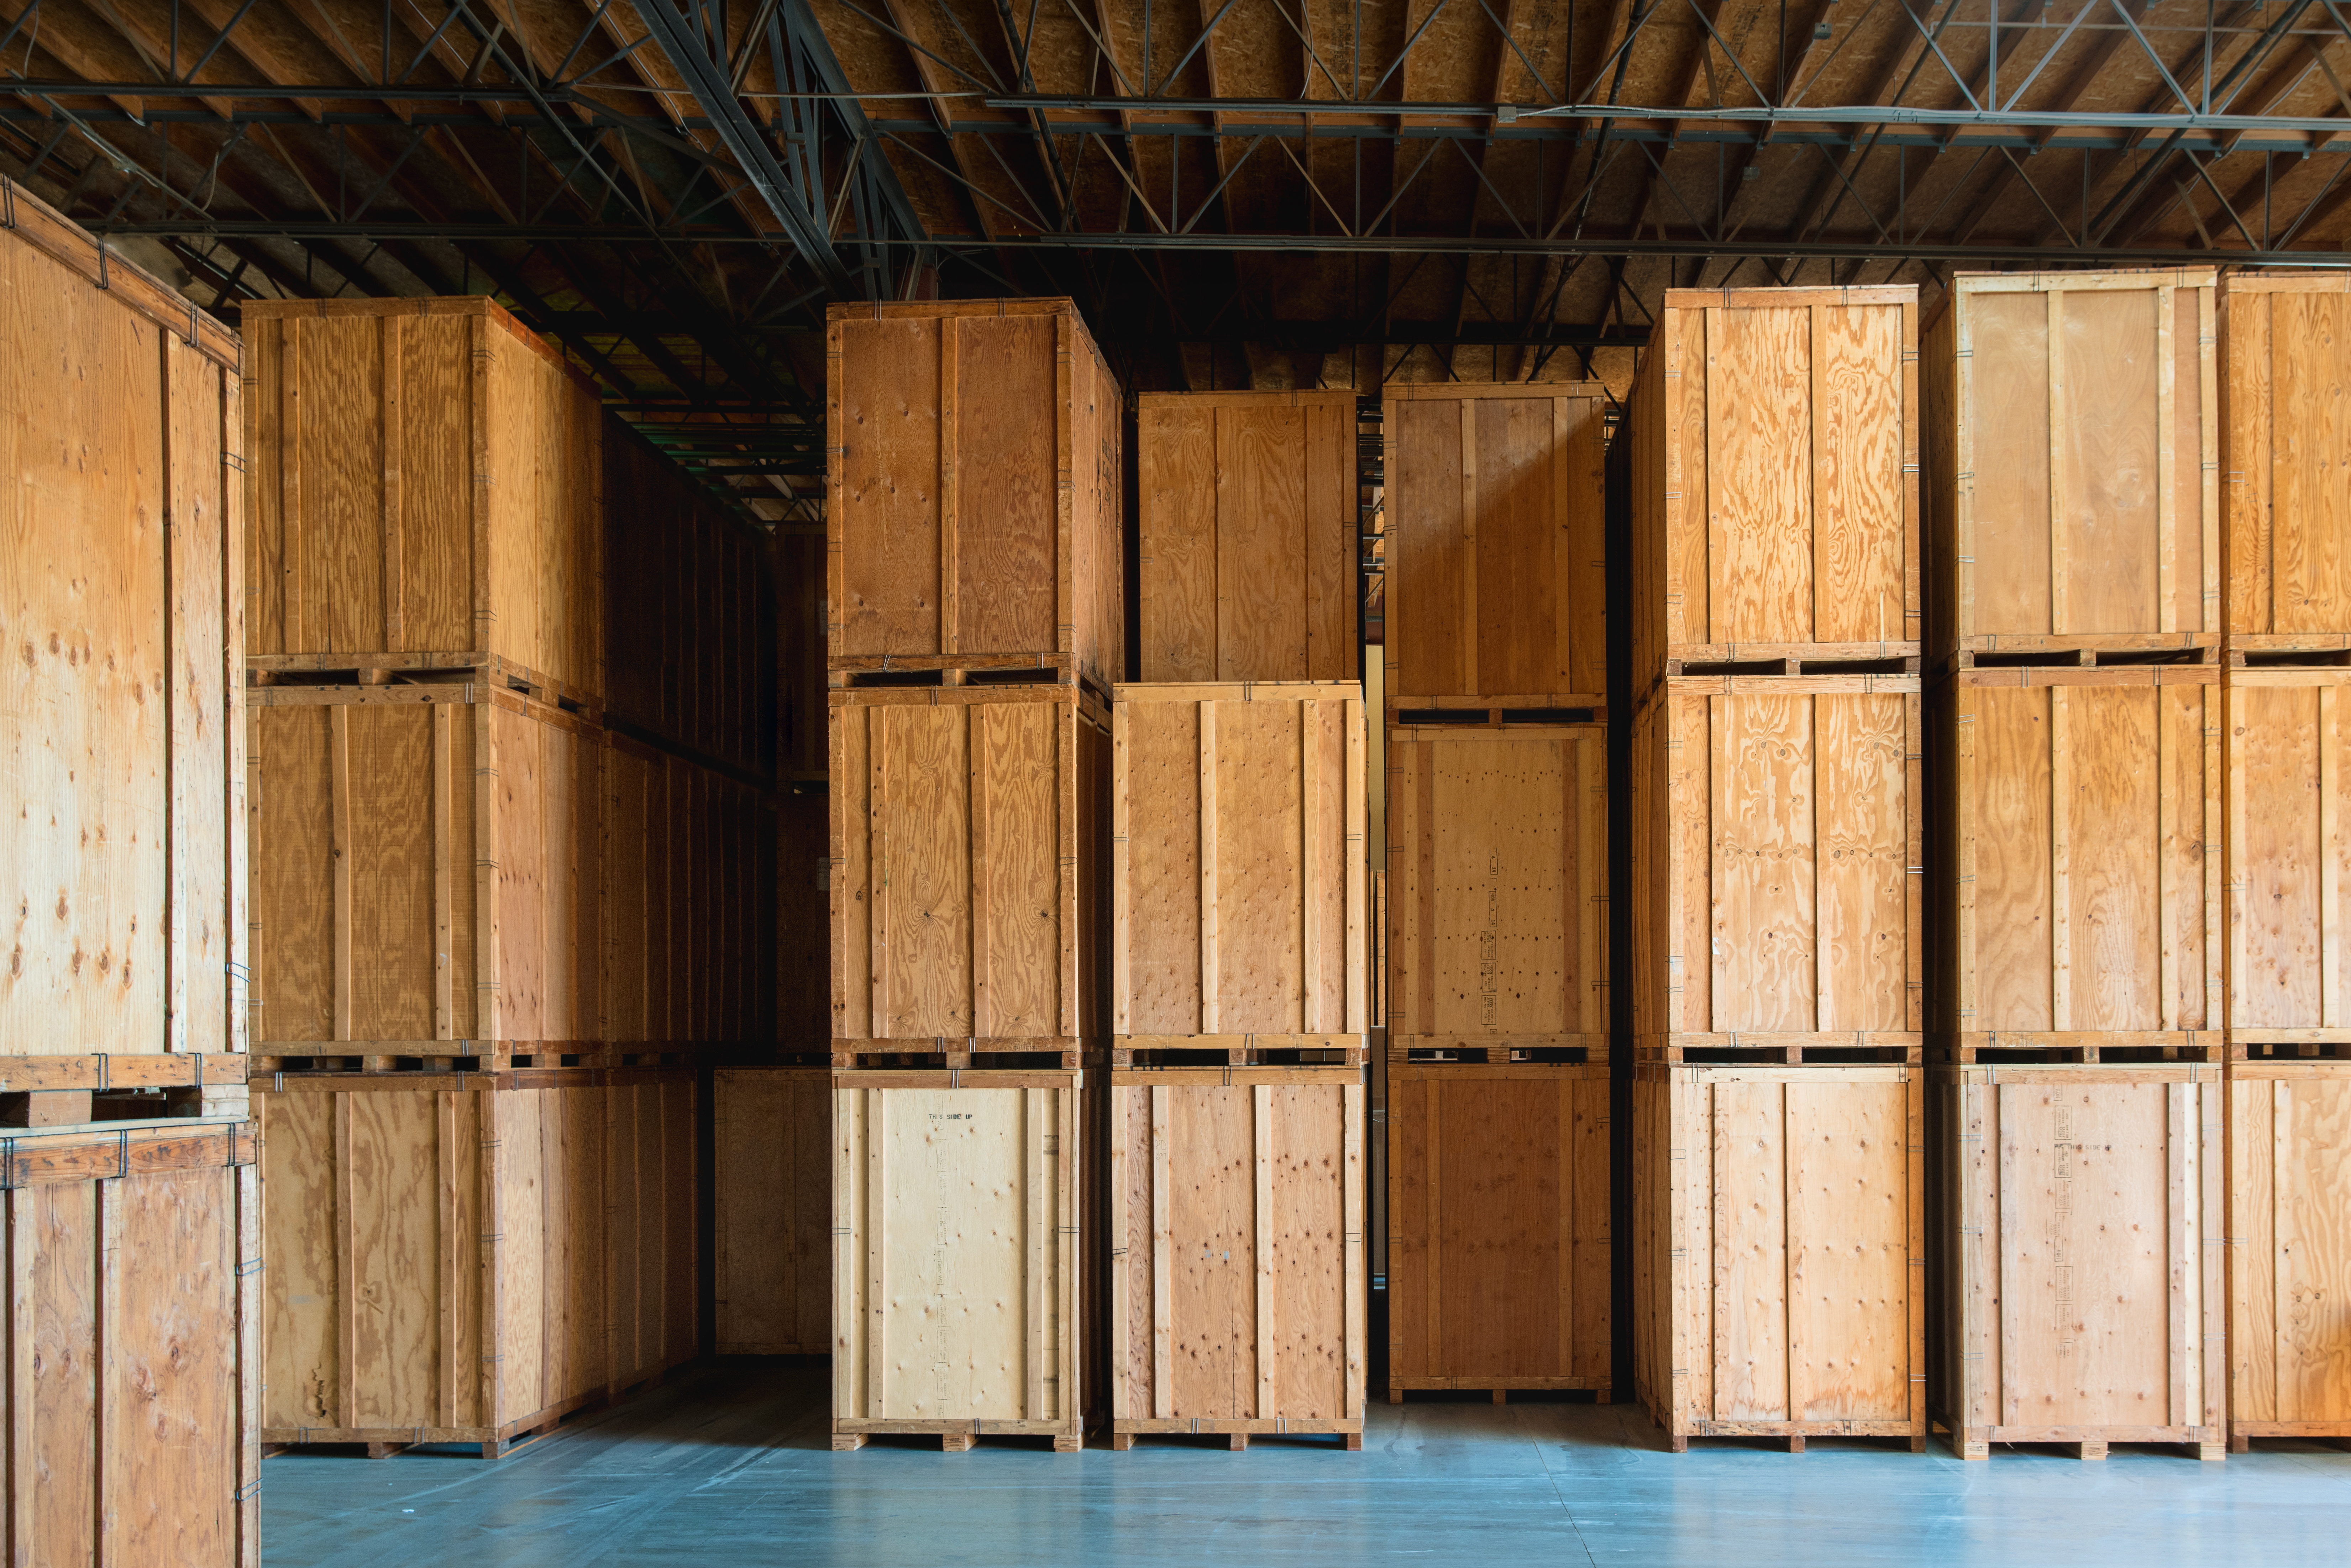 Clean Storage Warehouse with Custom Crates. Storage solutions with crates made of wood interior. Logistics and Distribution